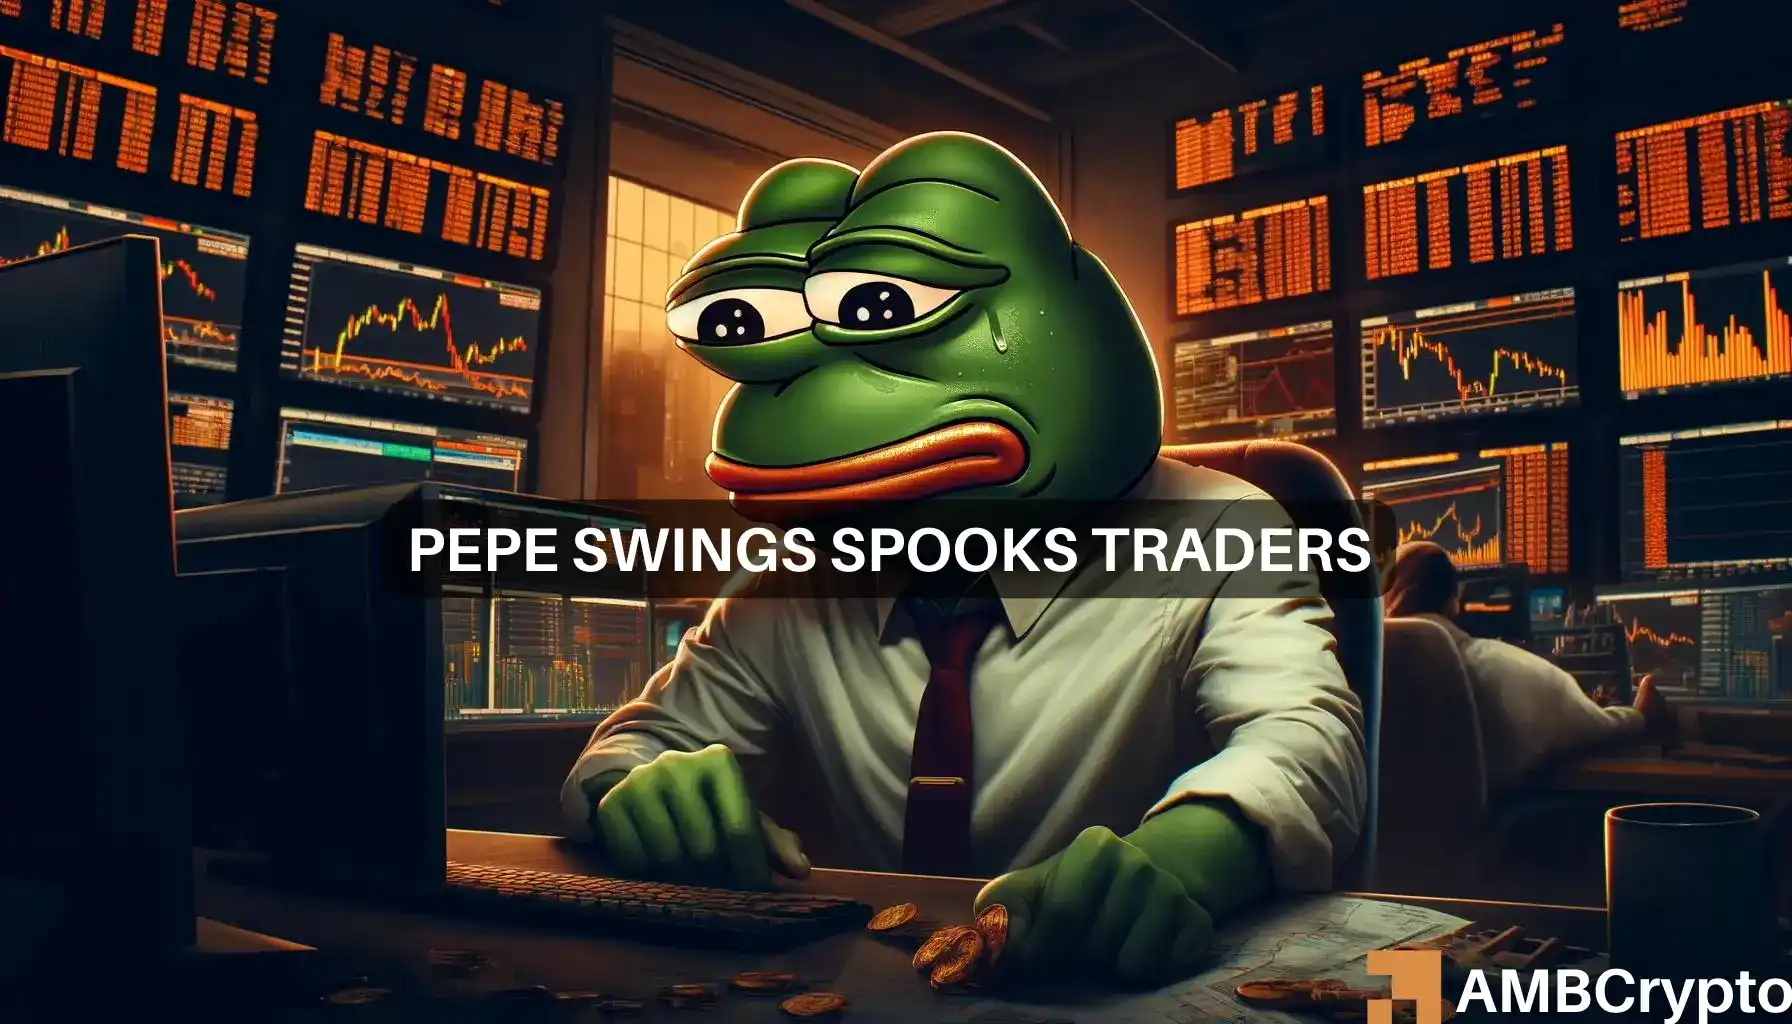 PEPE fights back even as Bitcoin wanes – But is it too late?